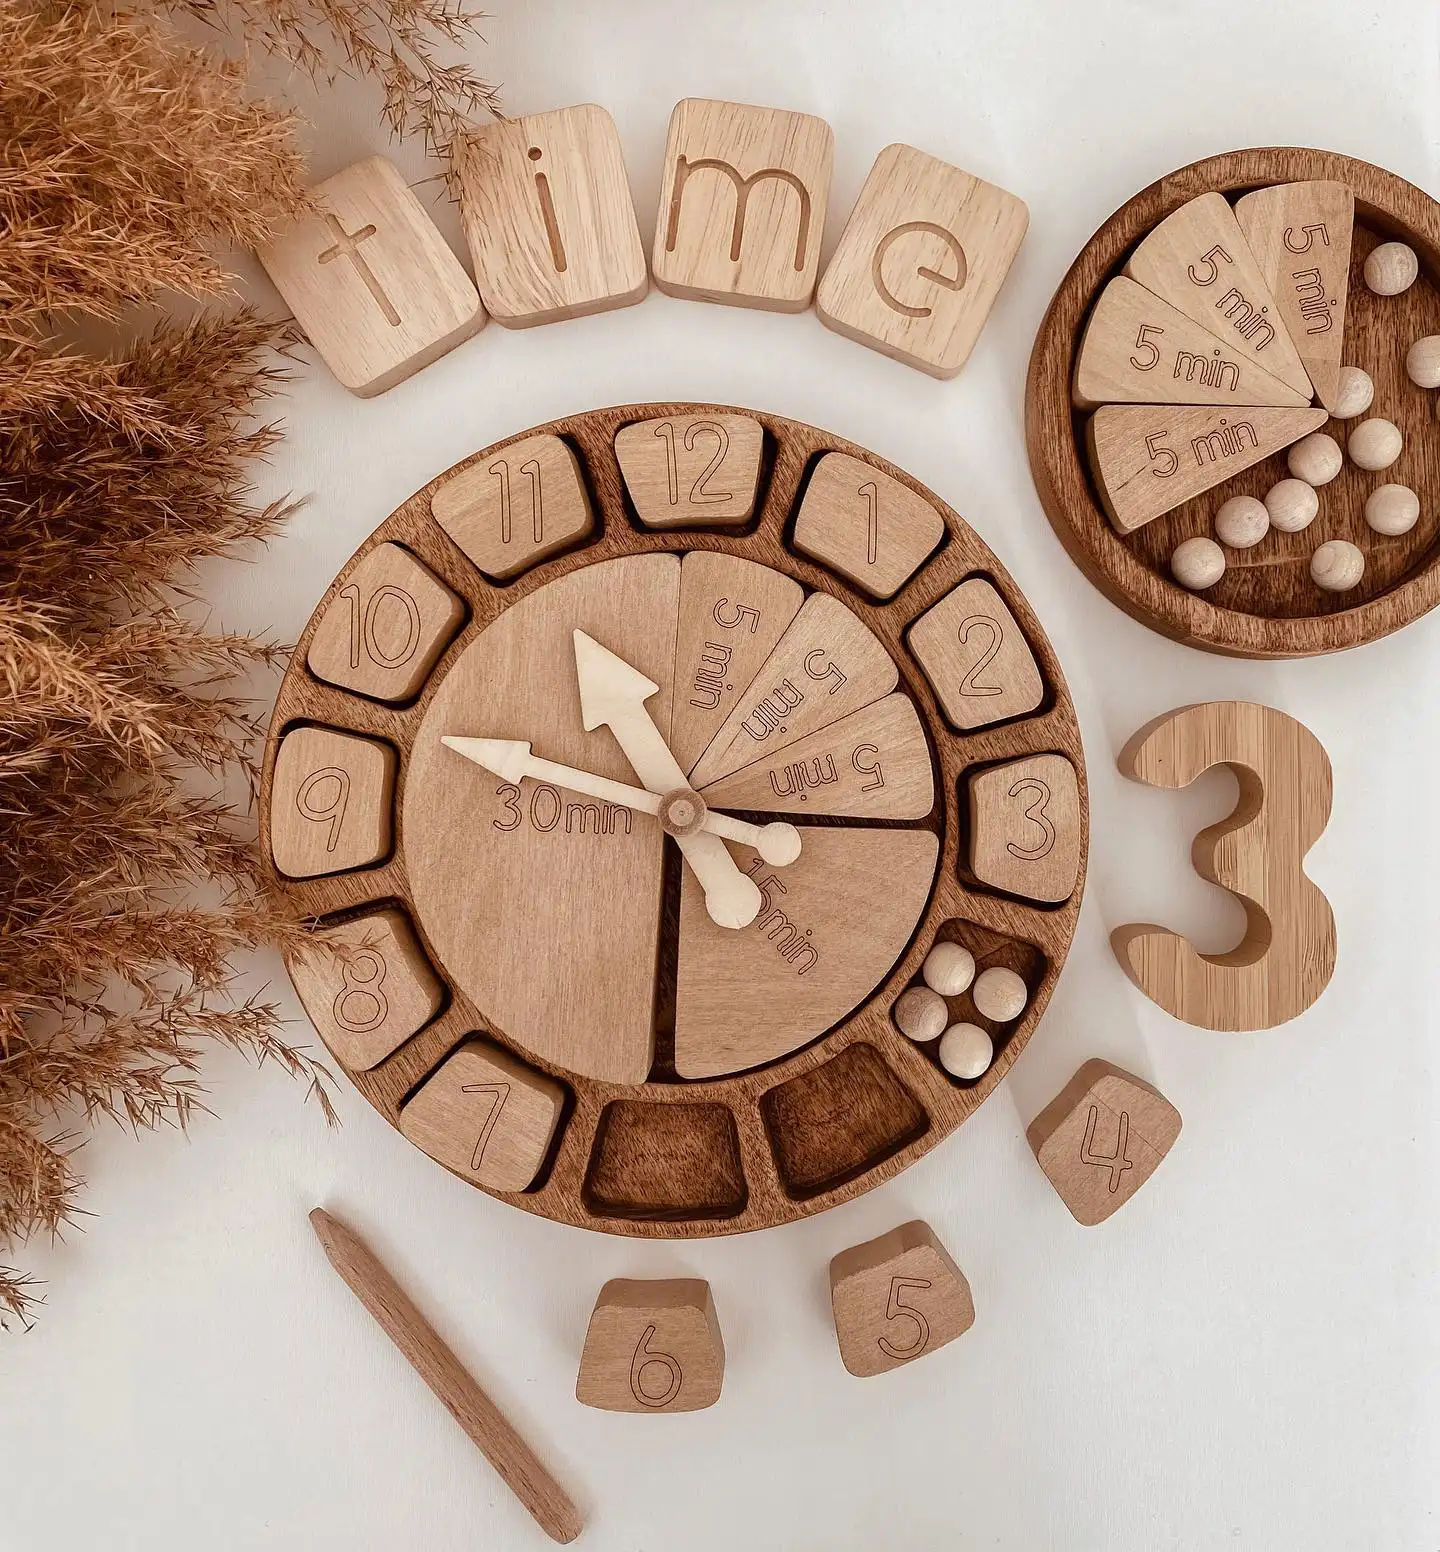 Tik tok New design Rustic wooden puzzle clock time Educational toys